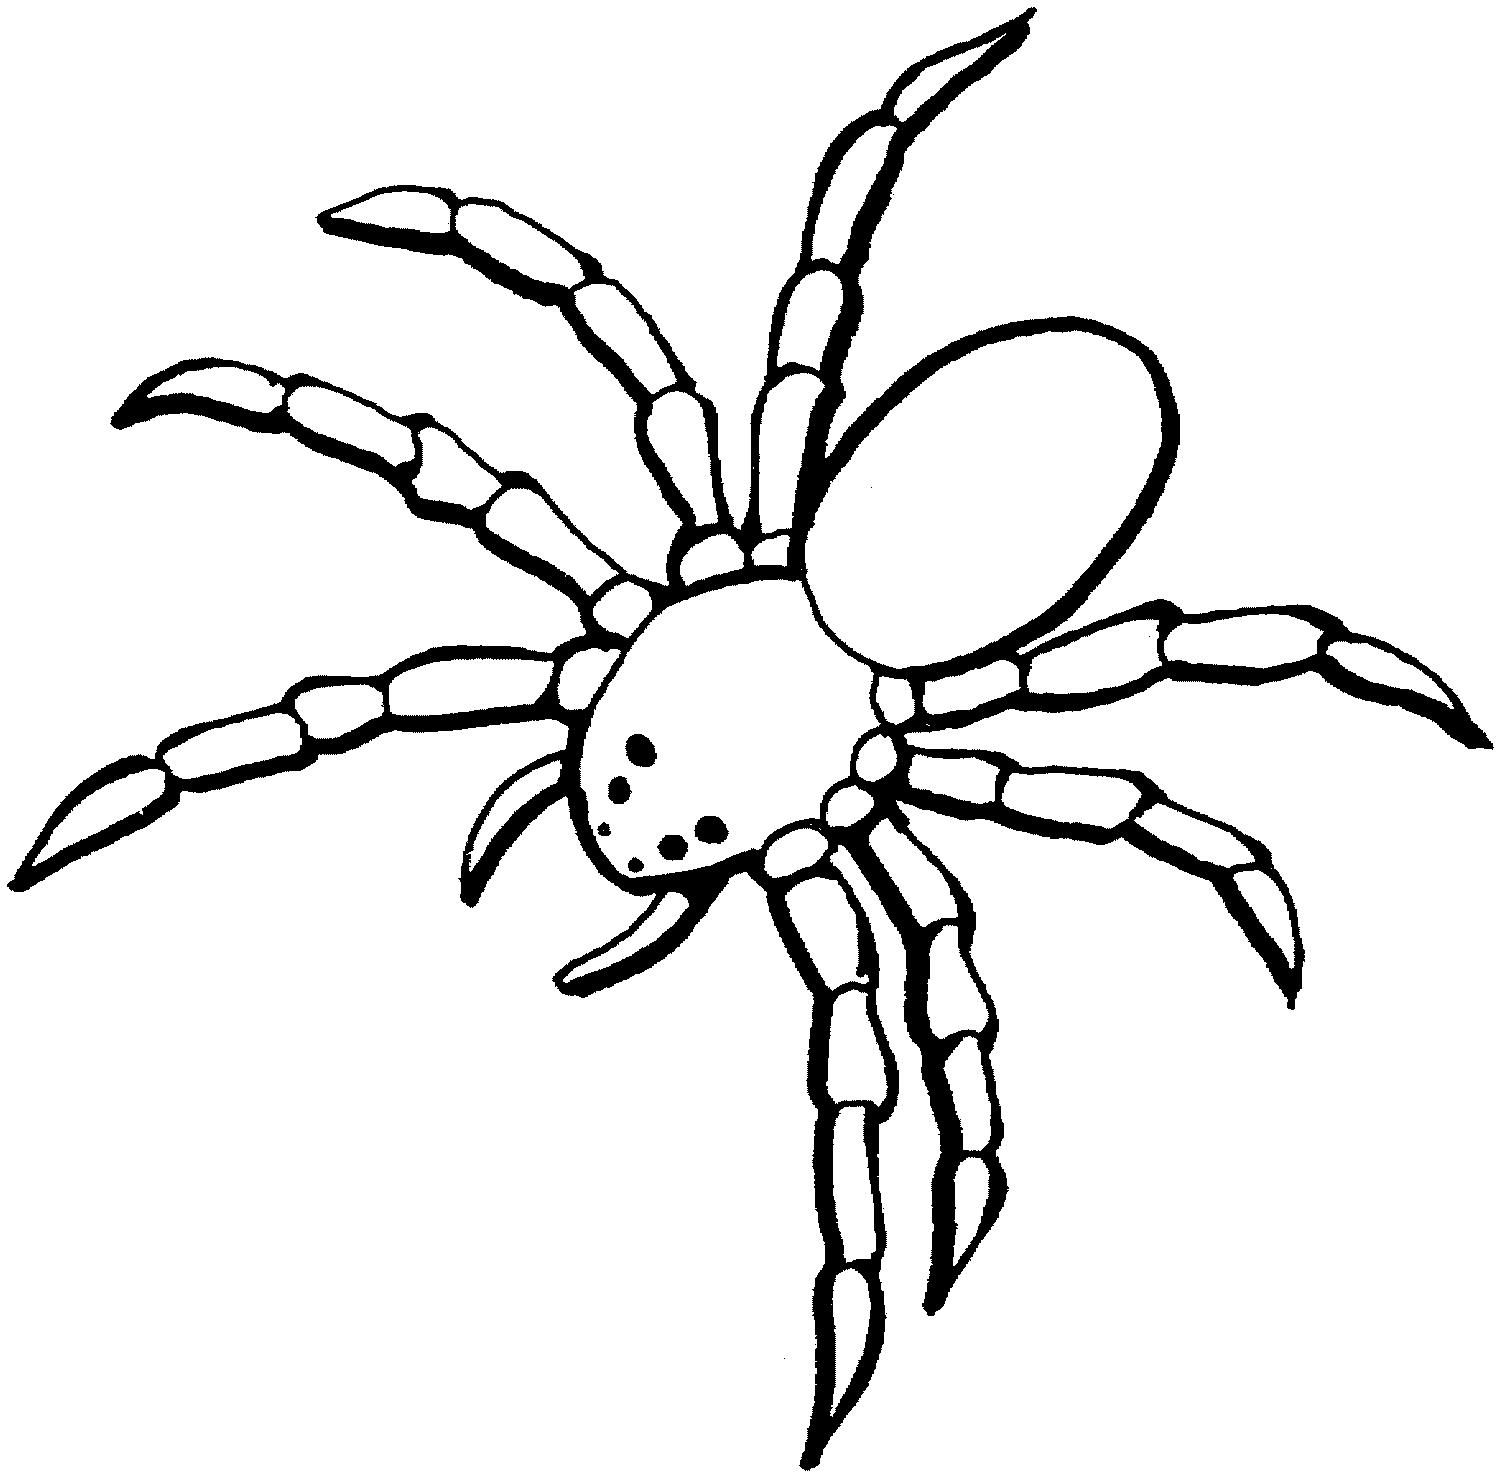 clip art you can color - photo #31